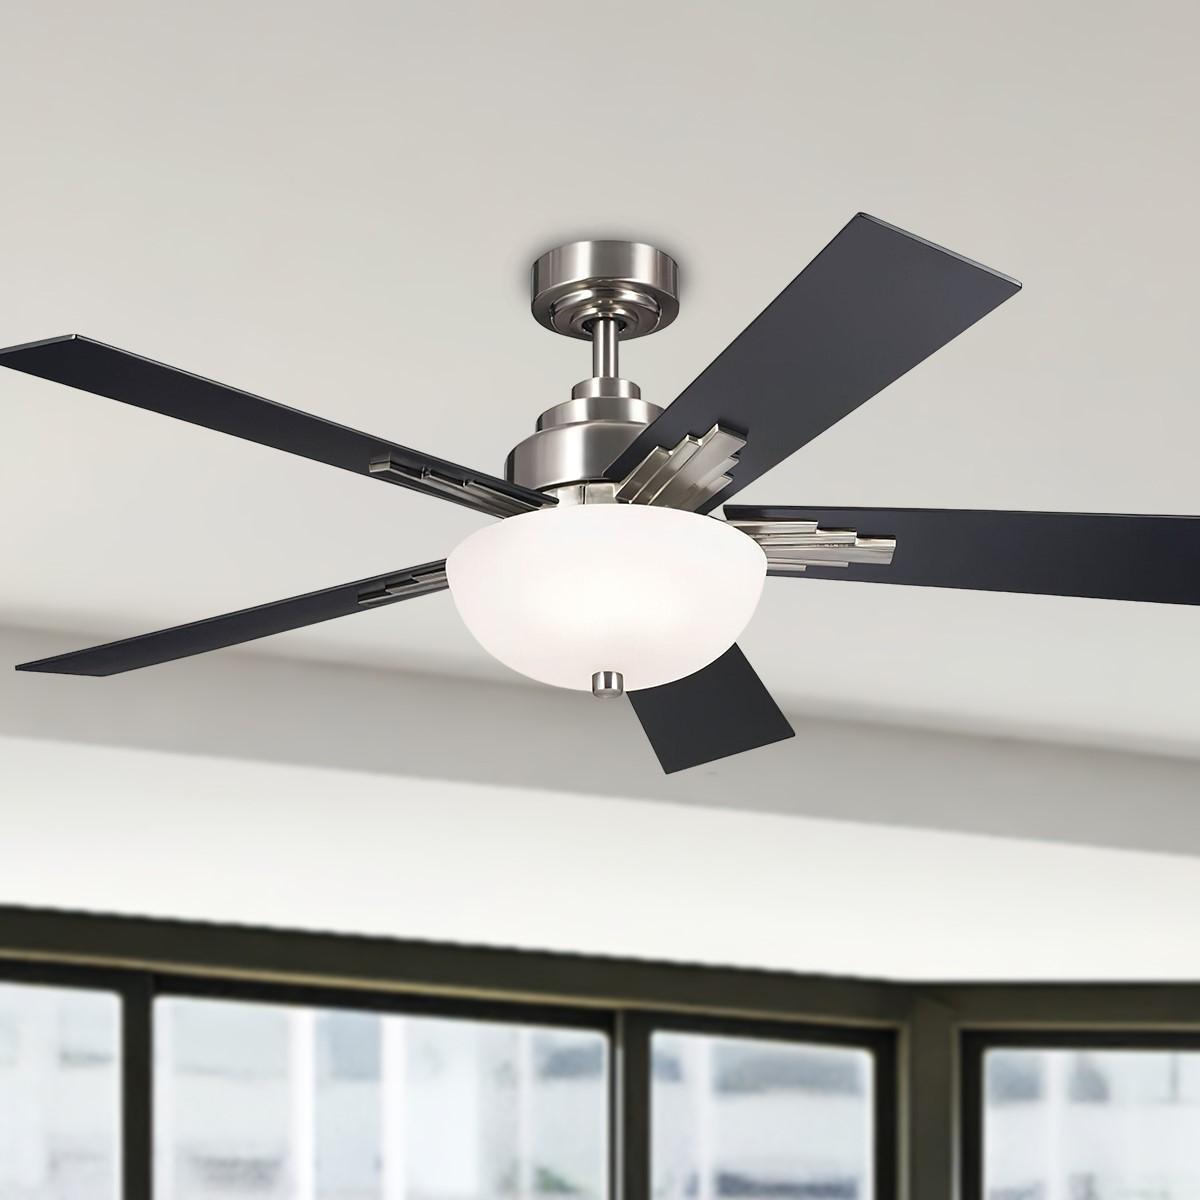 Kichler Vinea 52 Inch Modern Ceiling Fan With Light And Remote Bees Lighting